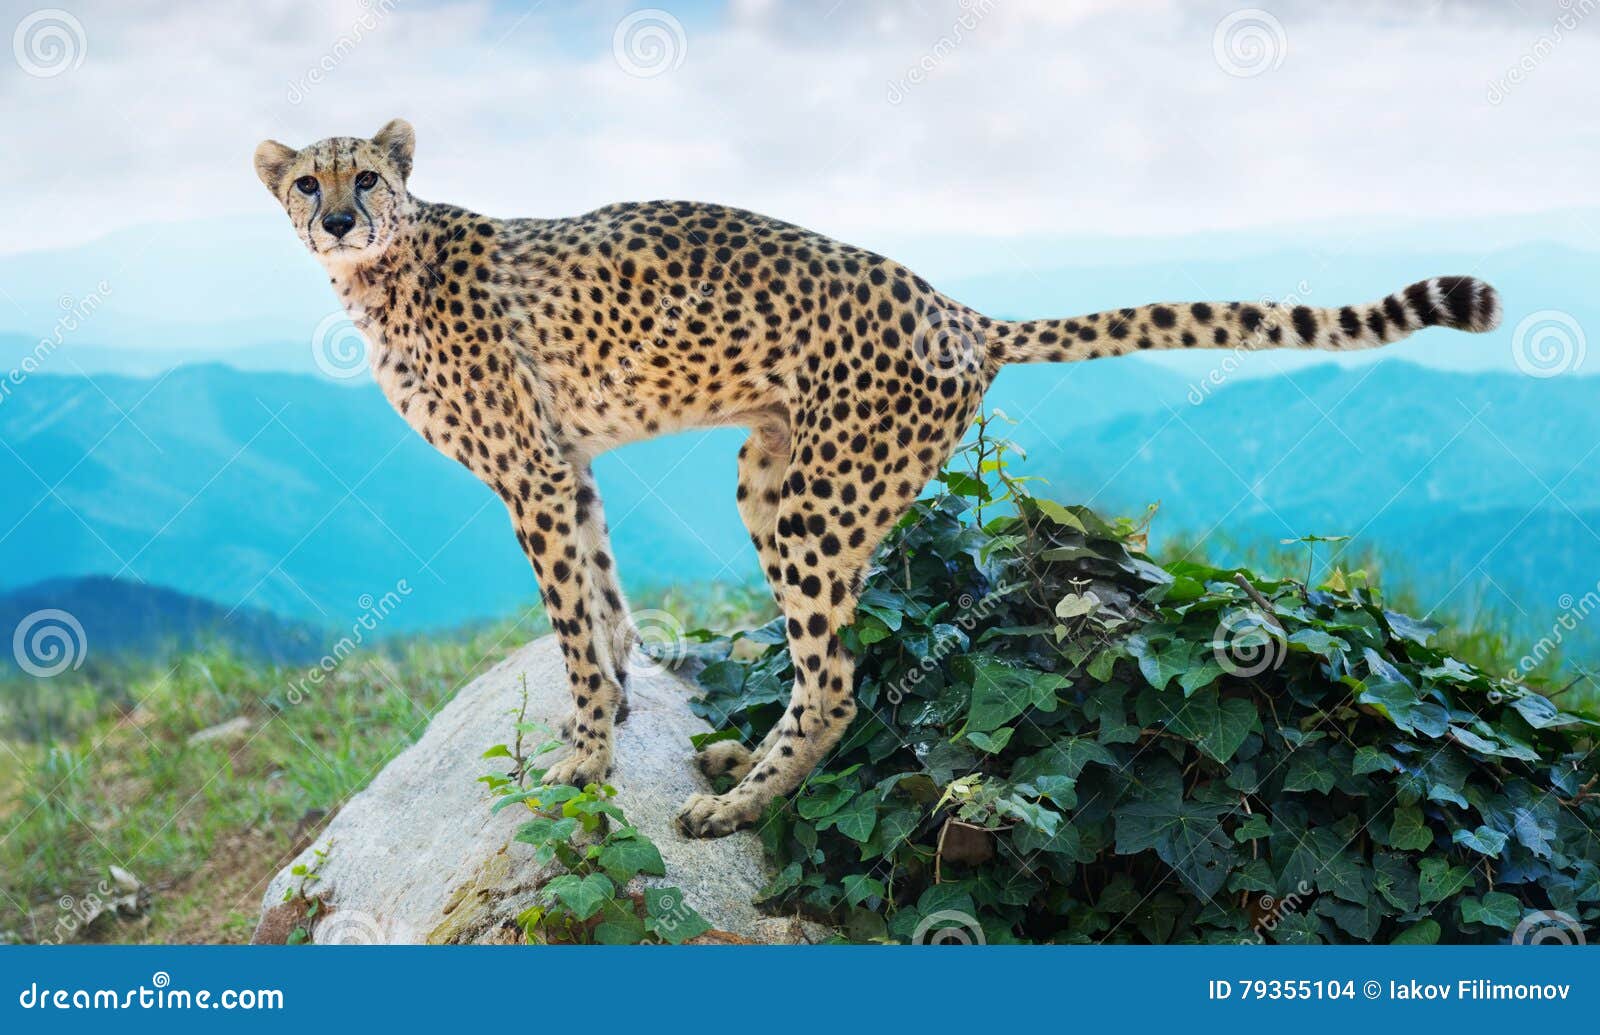 male cheetah standing on stone at wildness